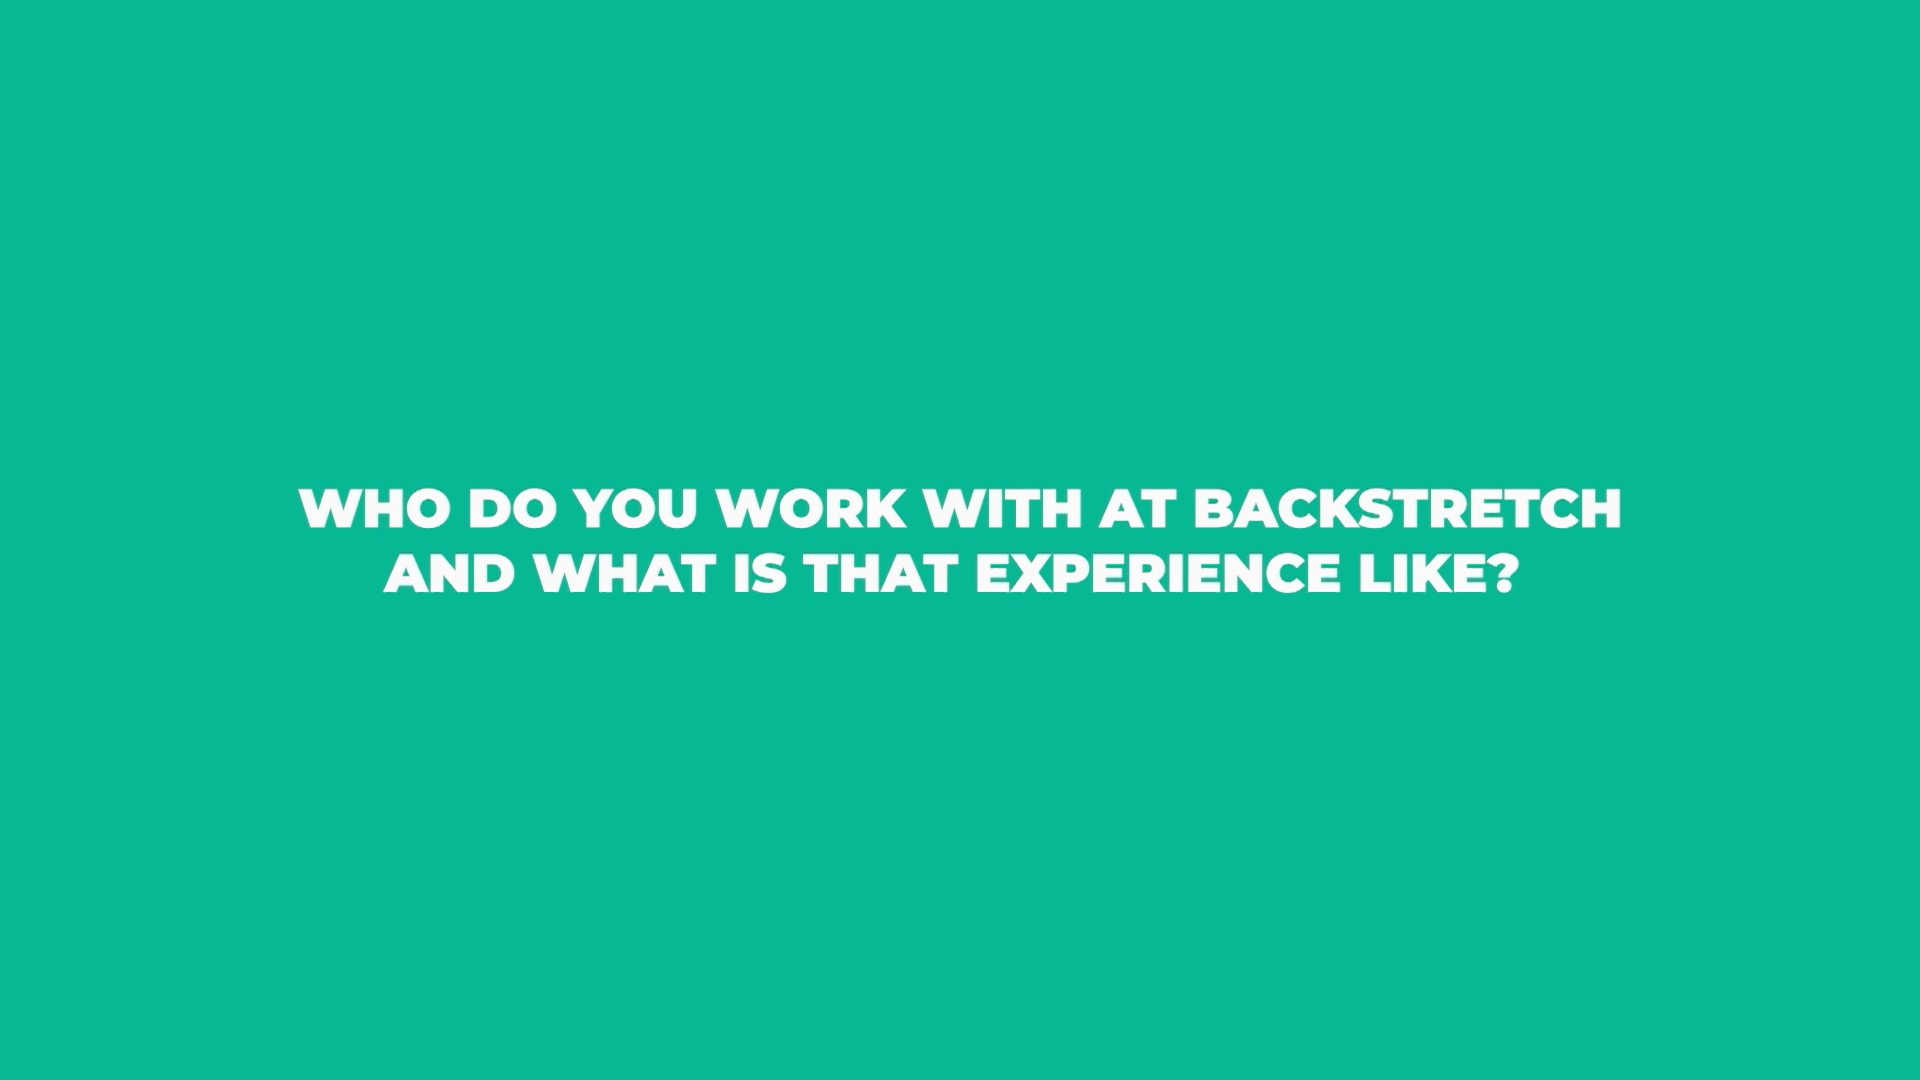 Who do you work with at BackStretch and what is that experience like?